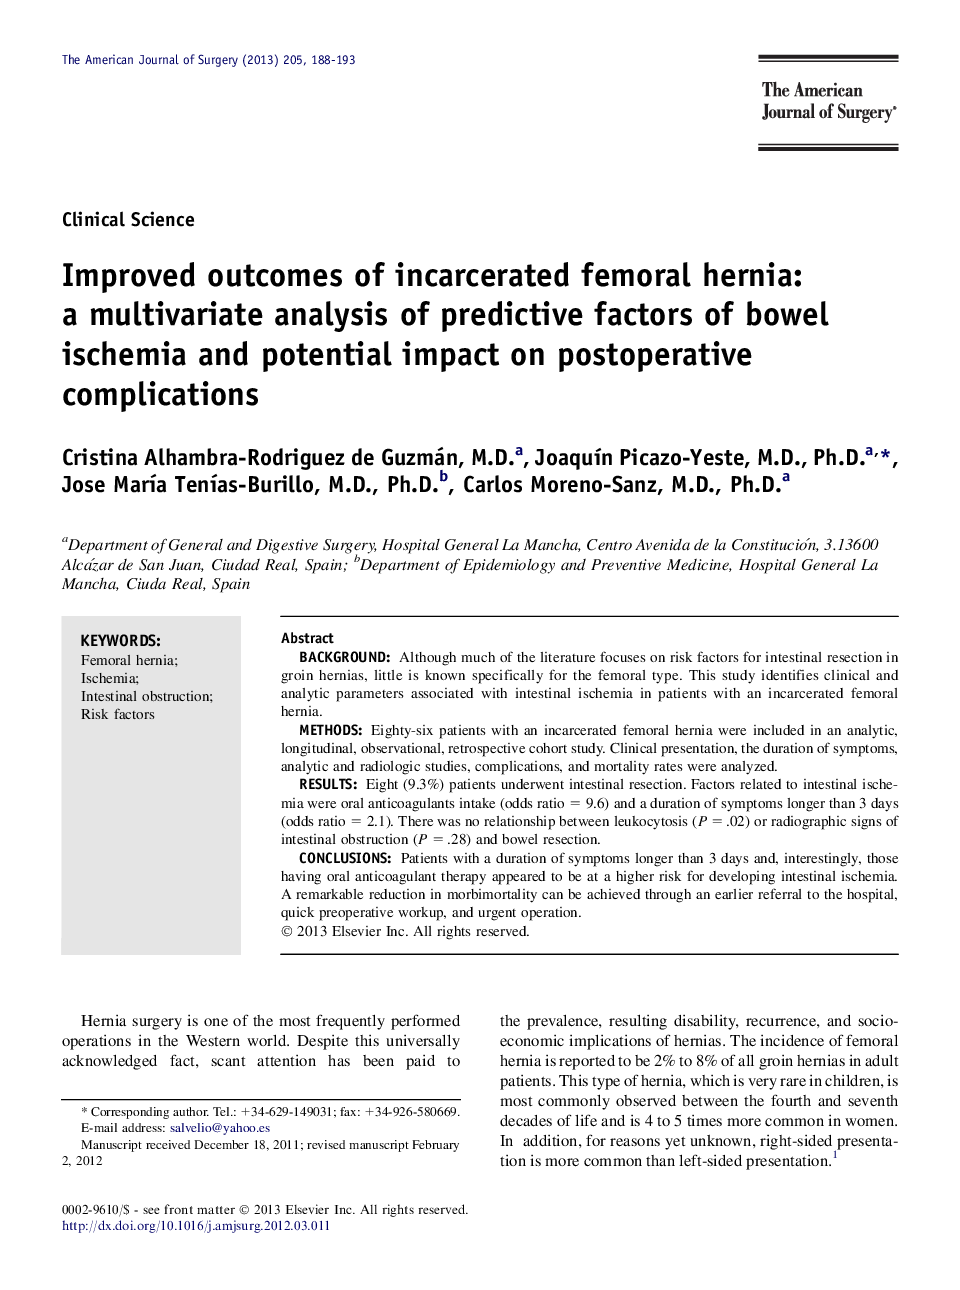 Improved outcomes of incarcerated femoral hernia: a multivariate analysis of predictive factors of bowel ischemia and potential impact on postoperative complications